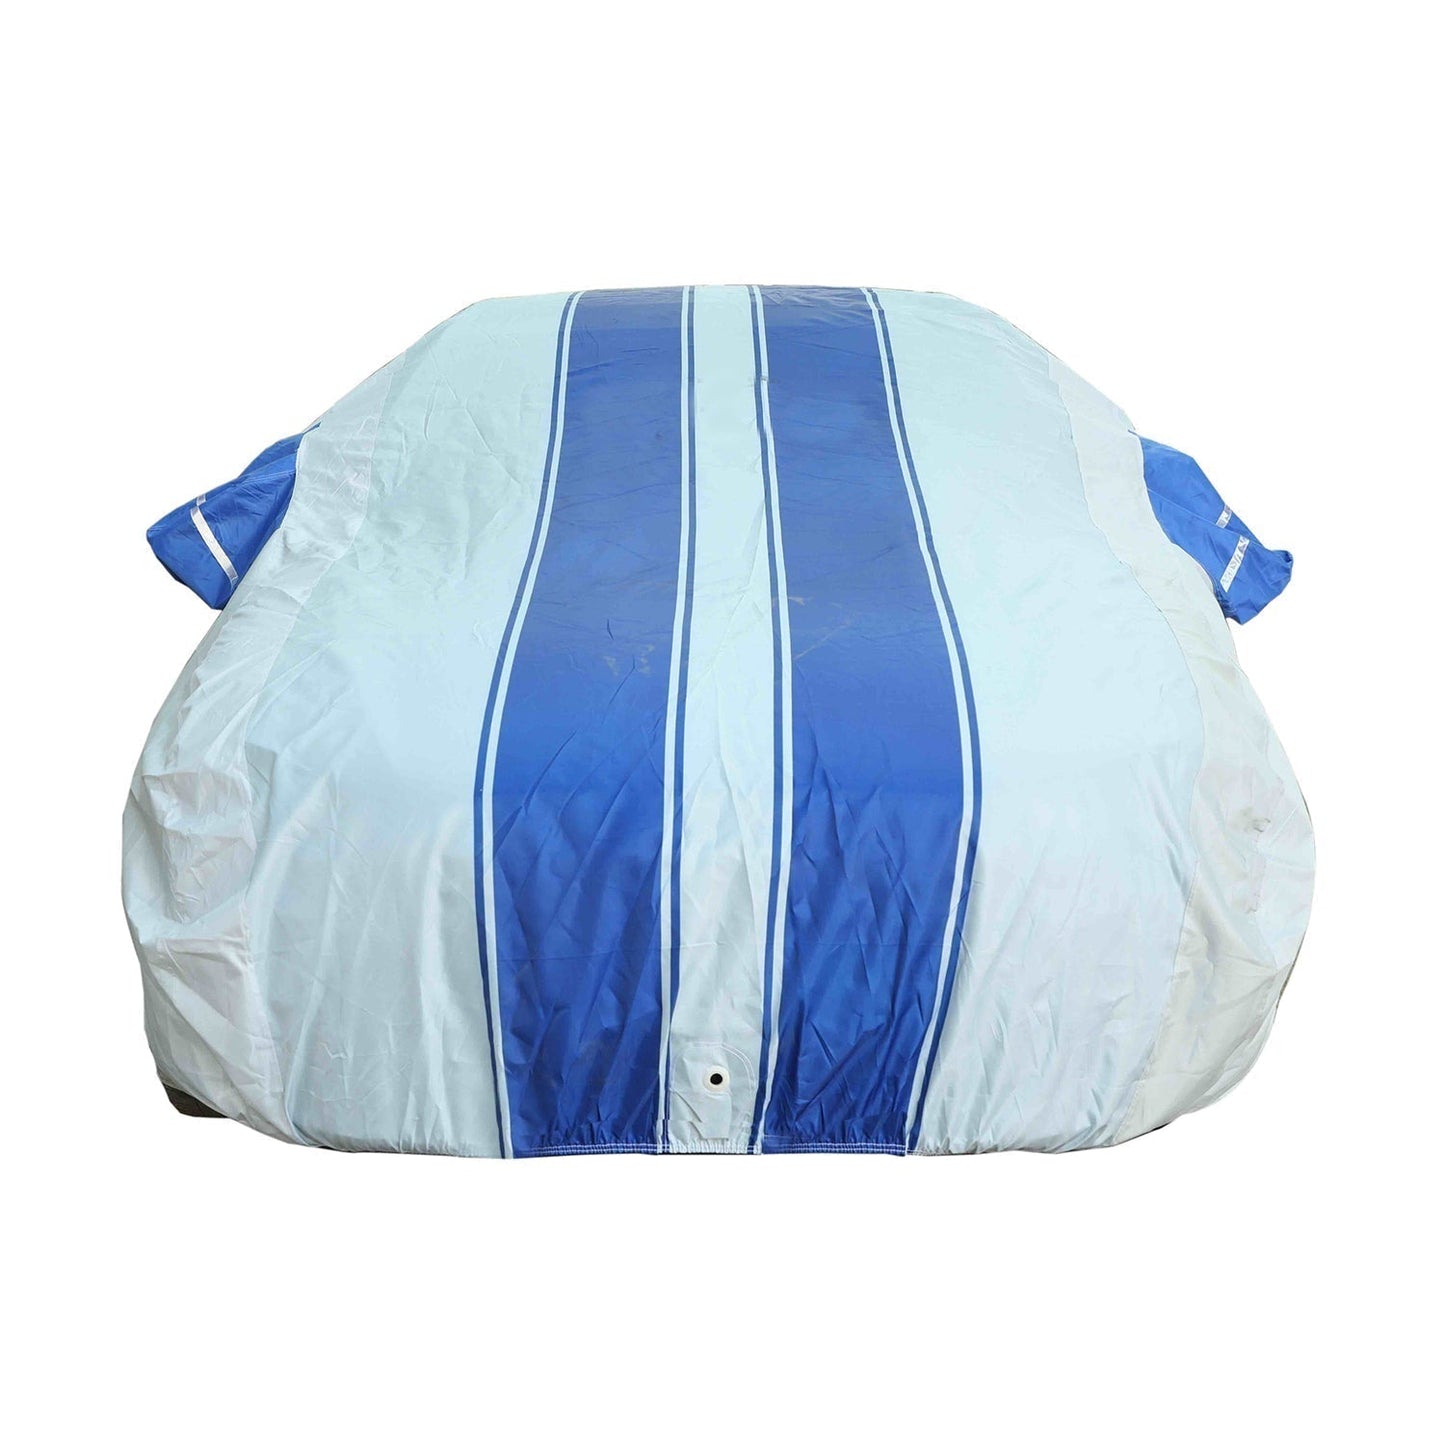 Oshotto 100% dustproof and Water Resistant Car Body Cover with Mirror Pockets For Toyota Innova Hycross (Blue)